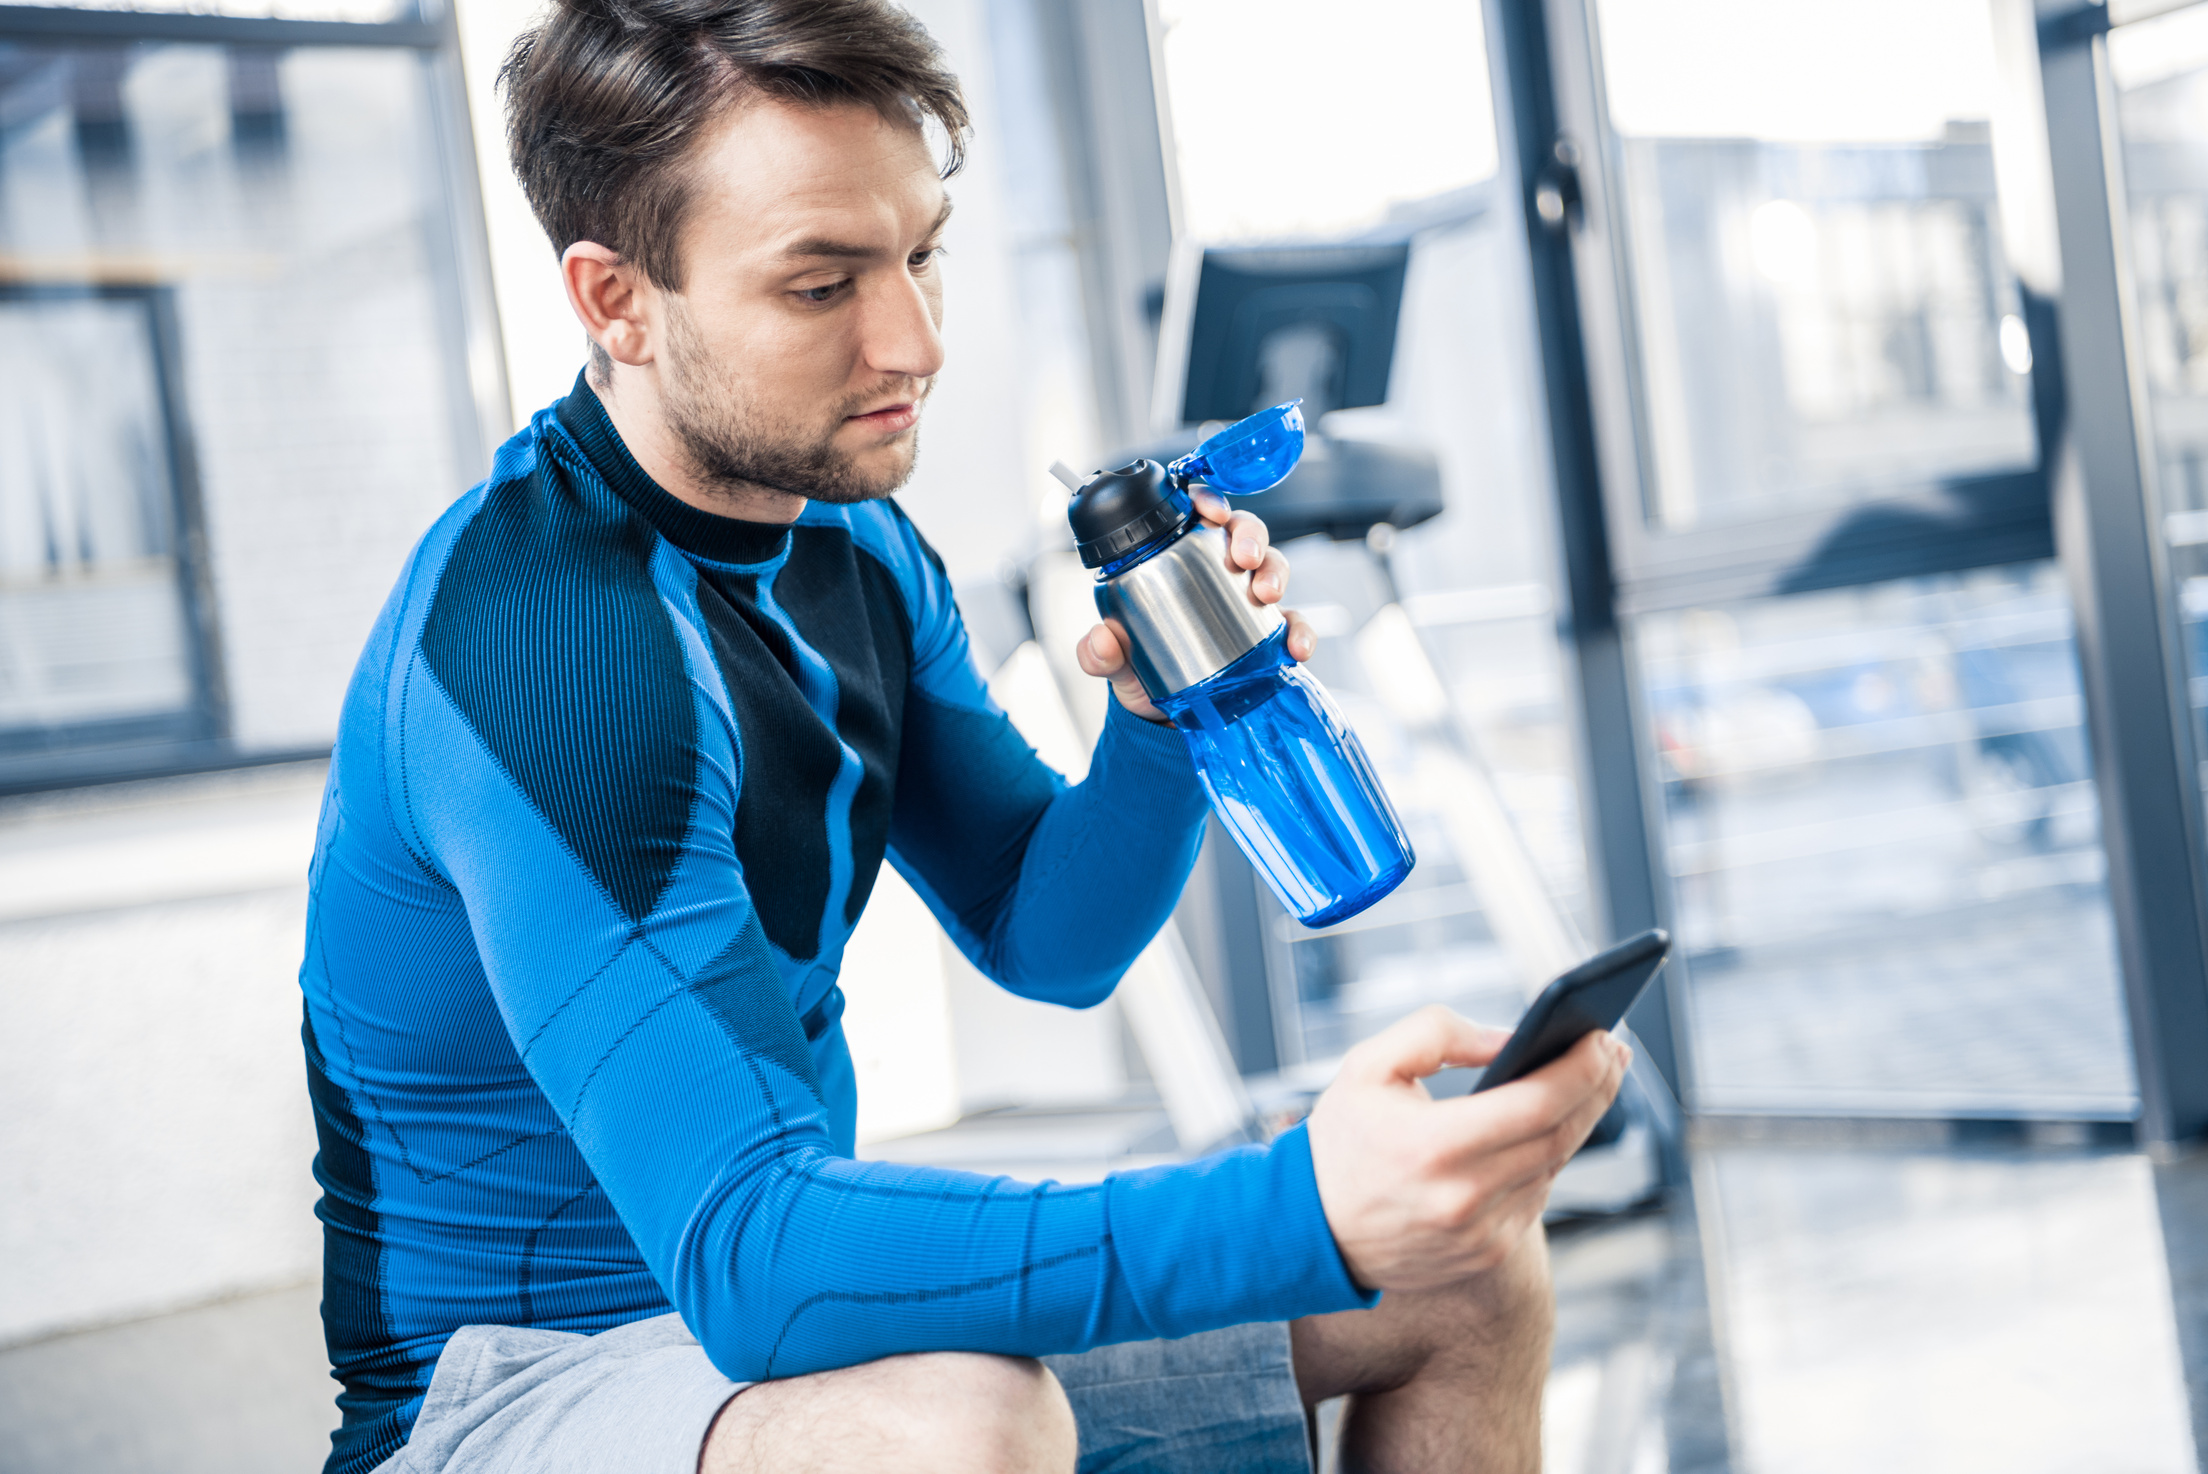 Handsome young man using smartphone at gym